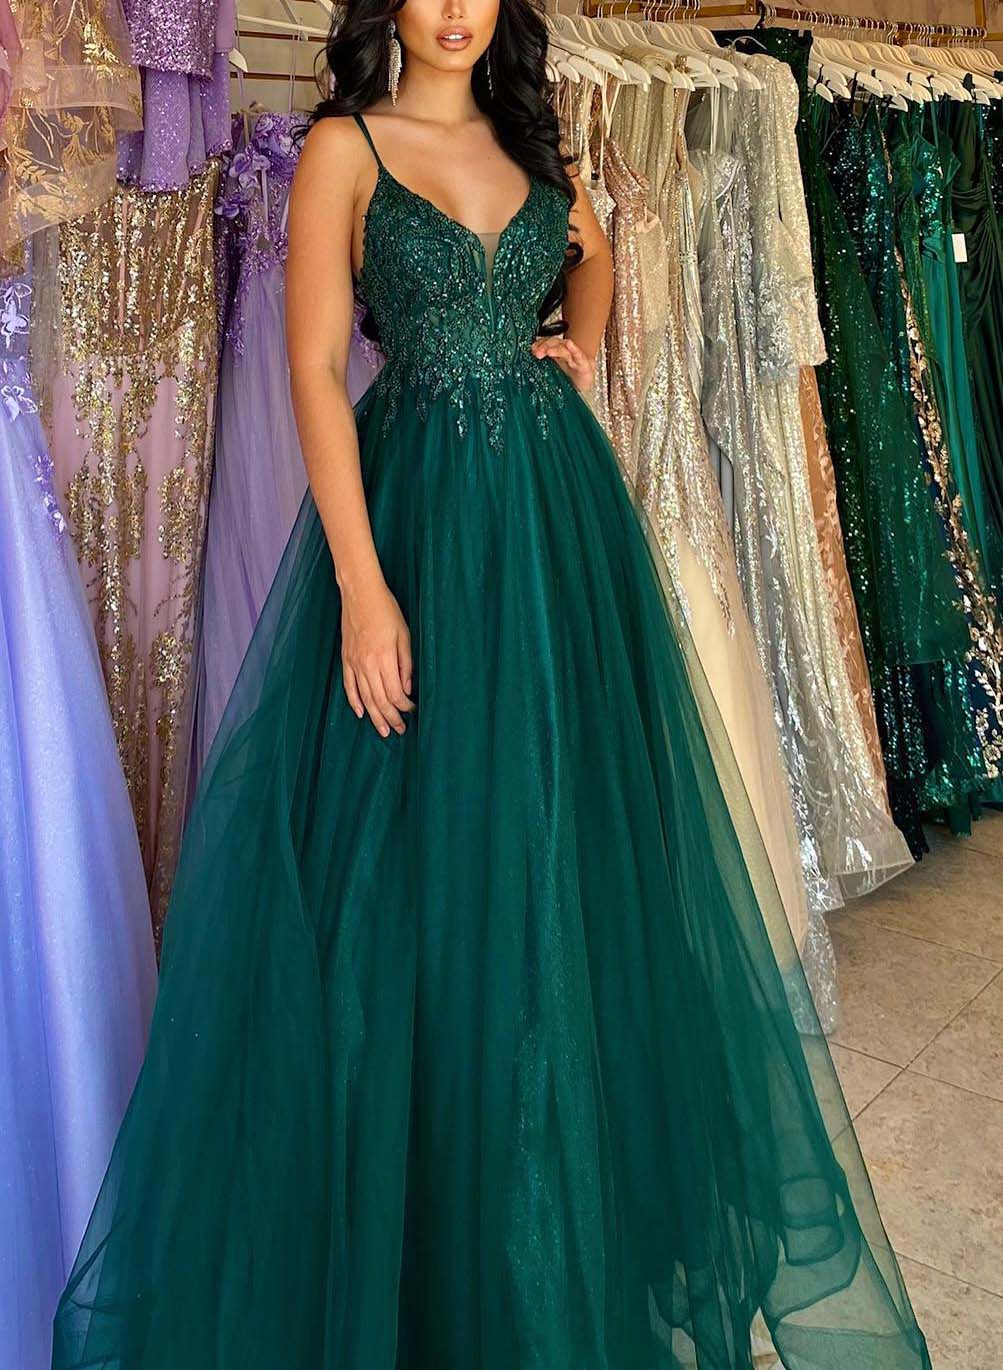 Sparkly Lace Plunge Spaghetti Straps A-Line Prom Dresses